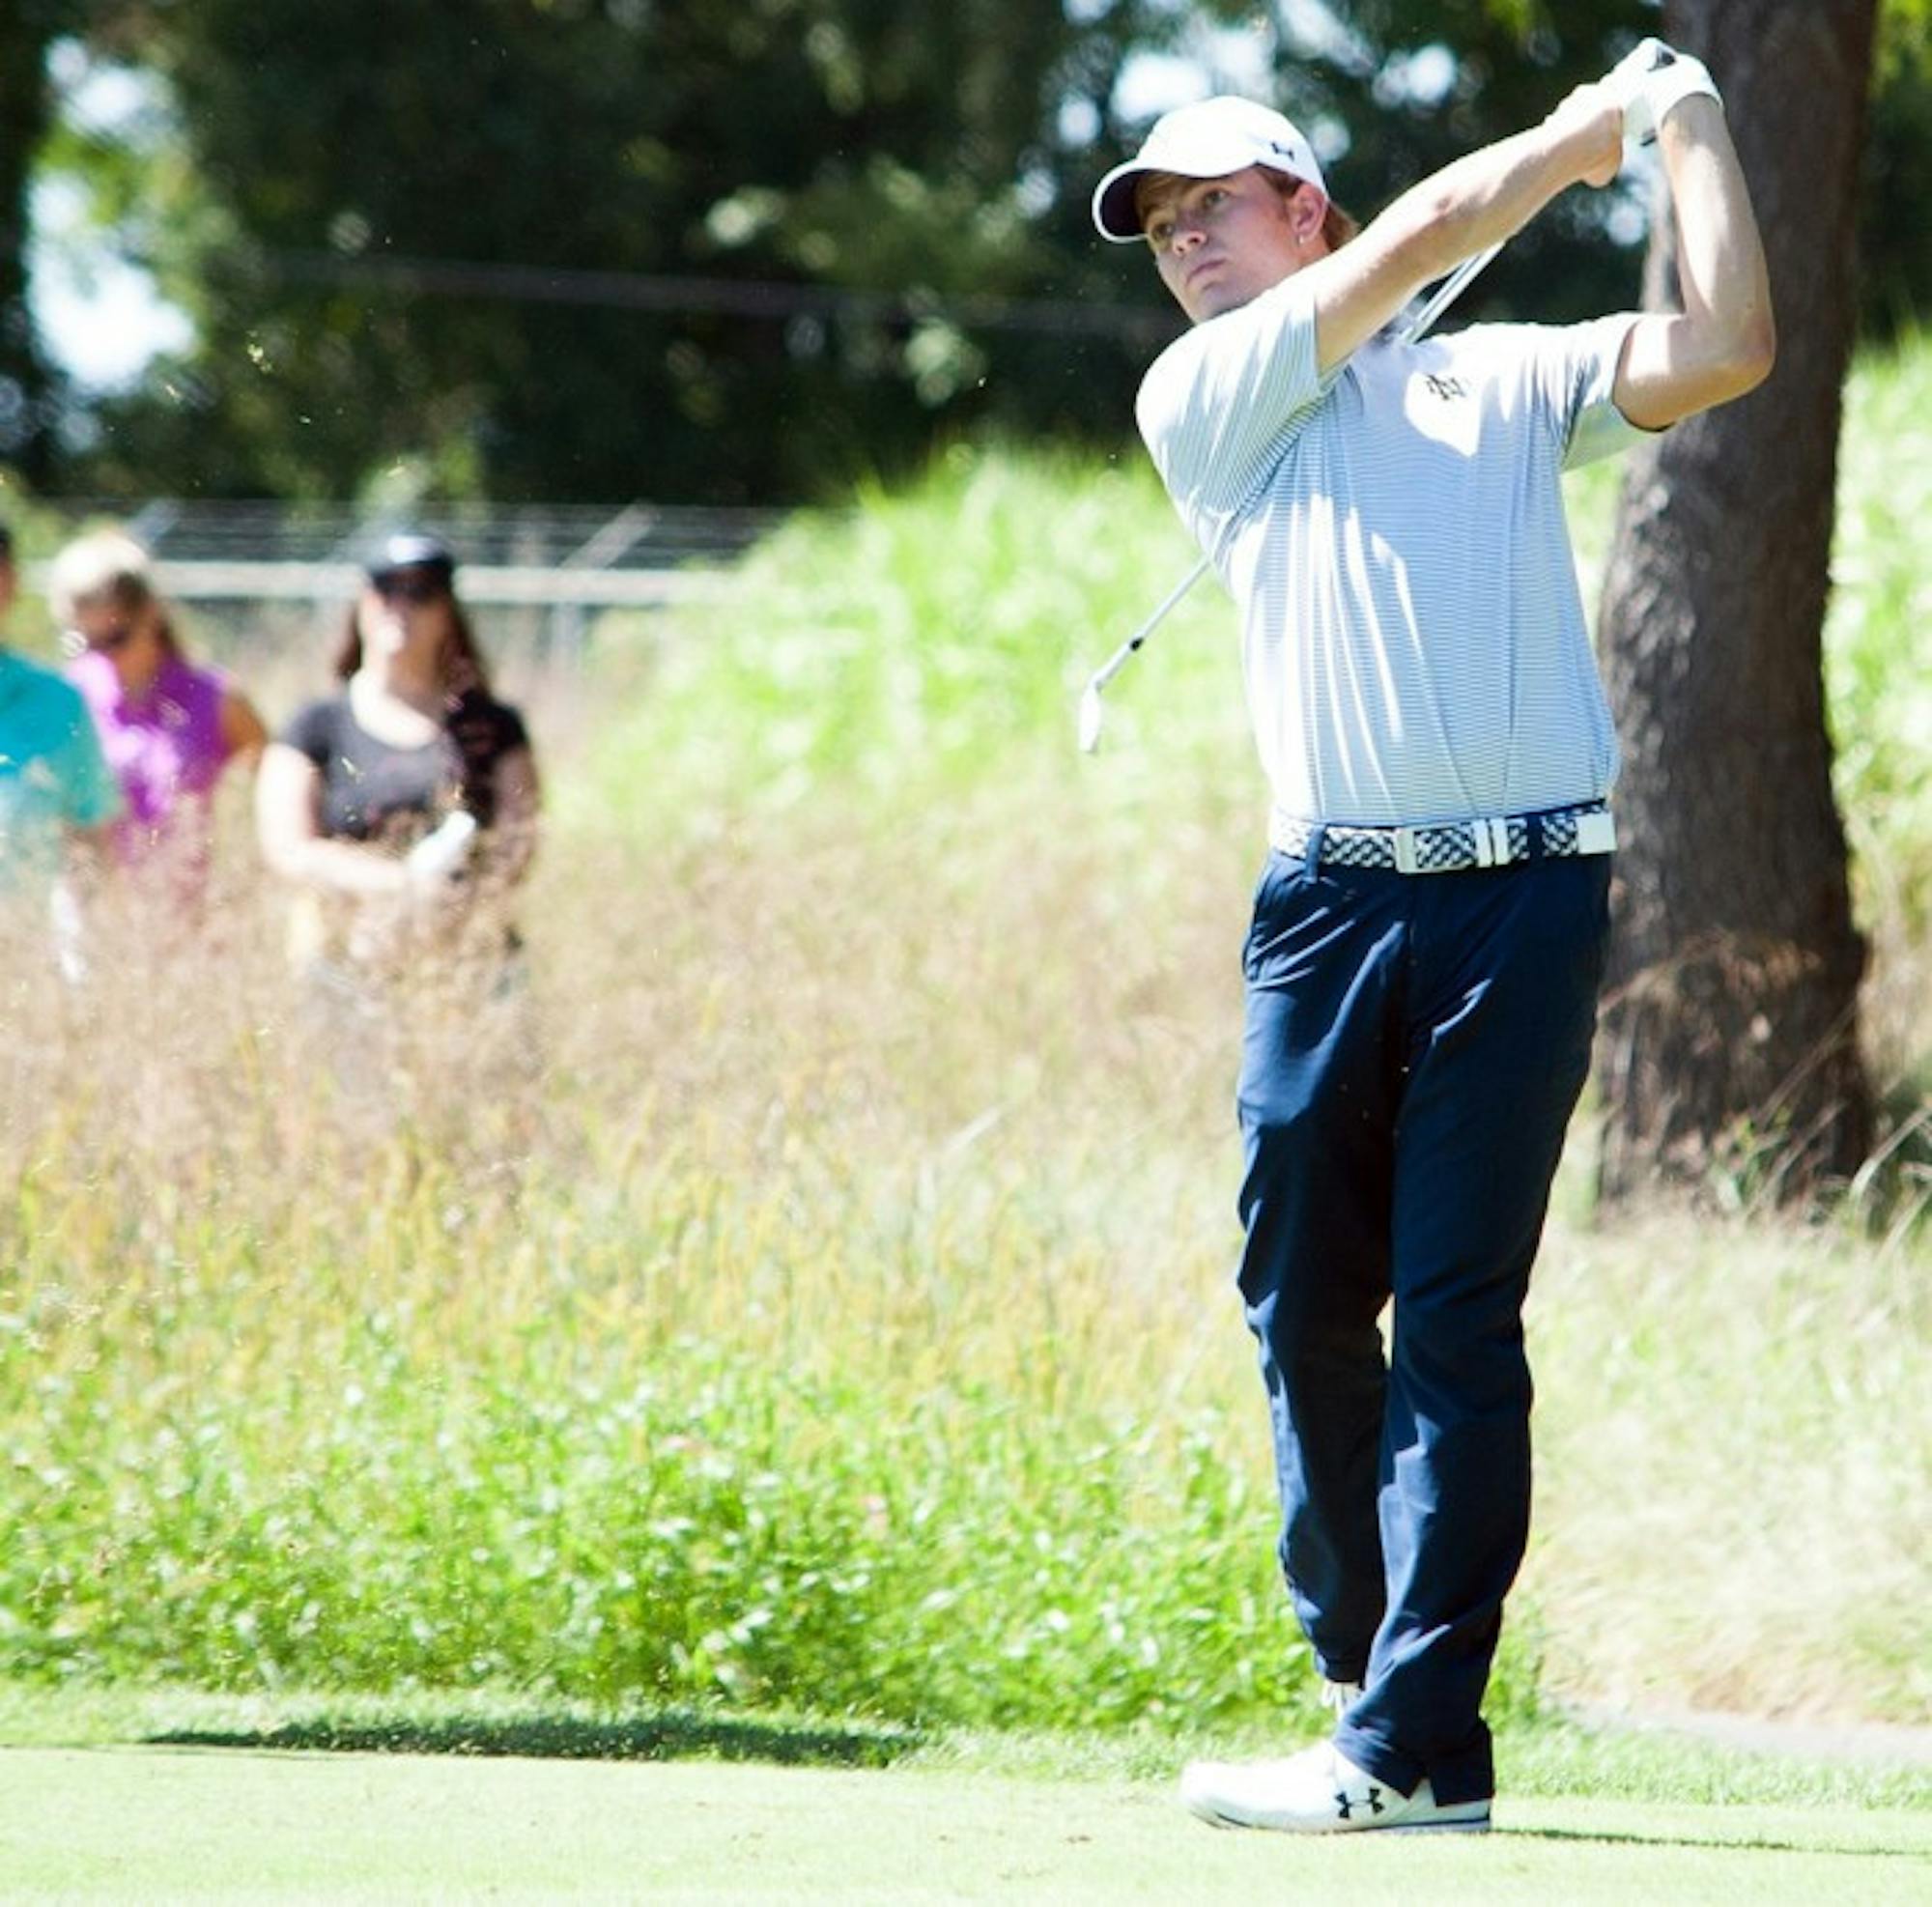 Senior Blake Barens follows through on a swing during the Notre Dame Kickoff Challenge on Sept. 3 at Warren Golf Course.